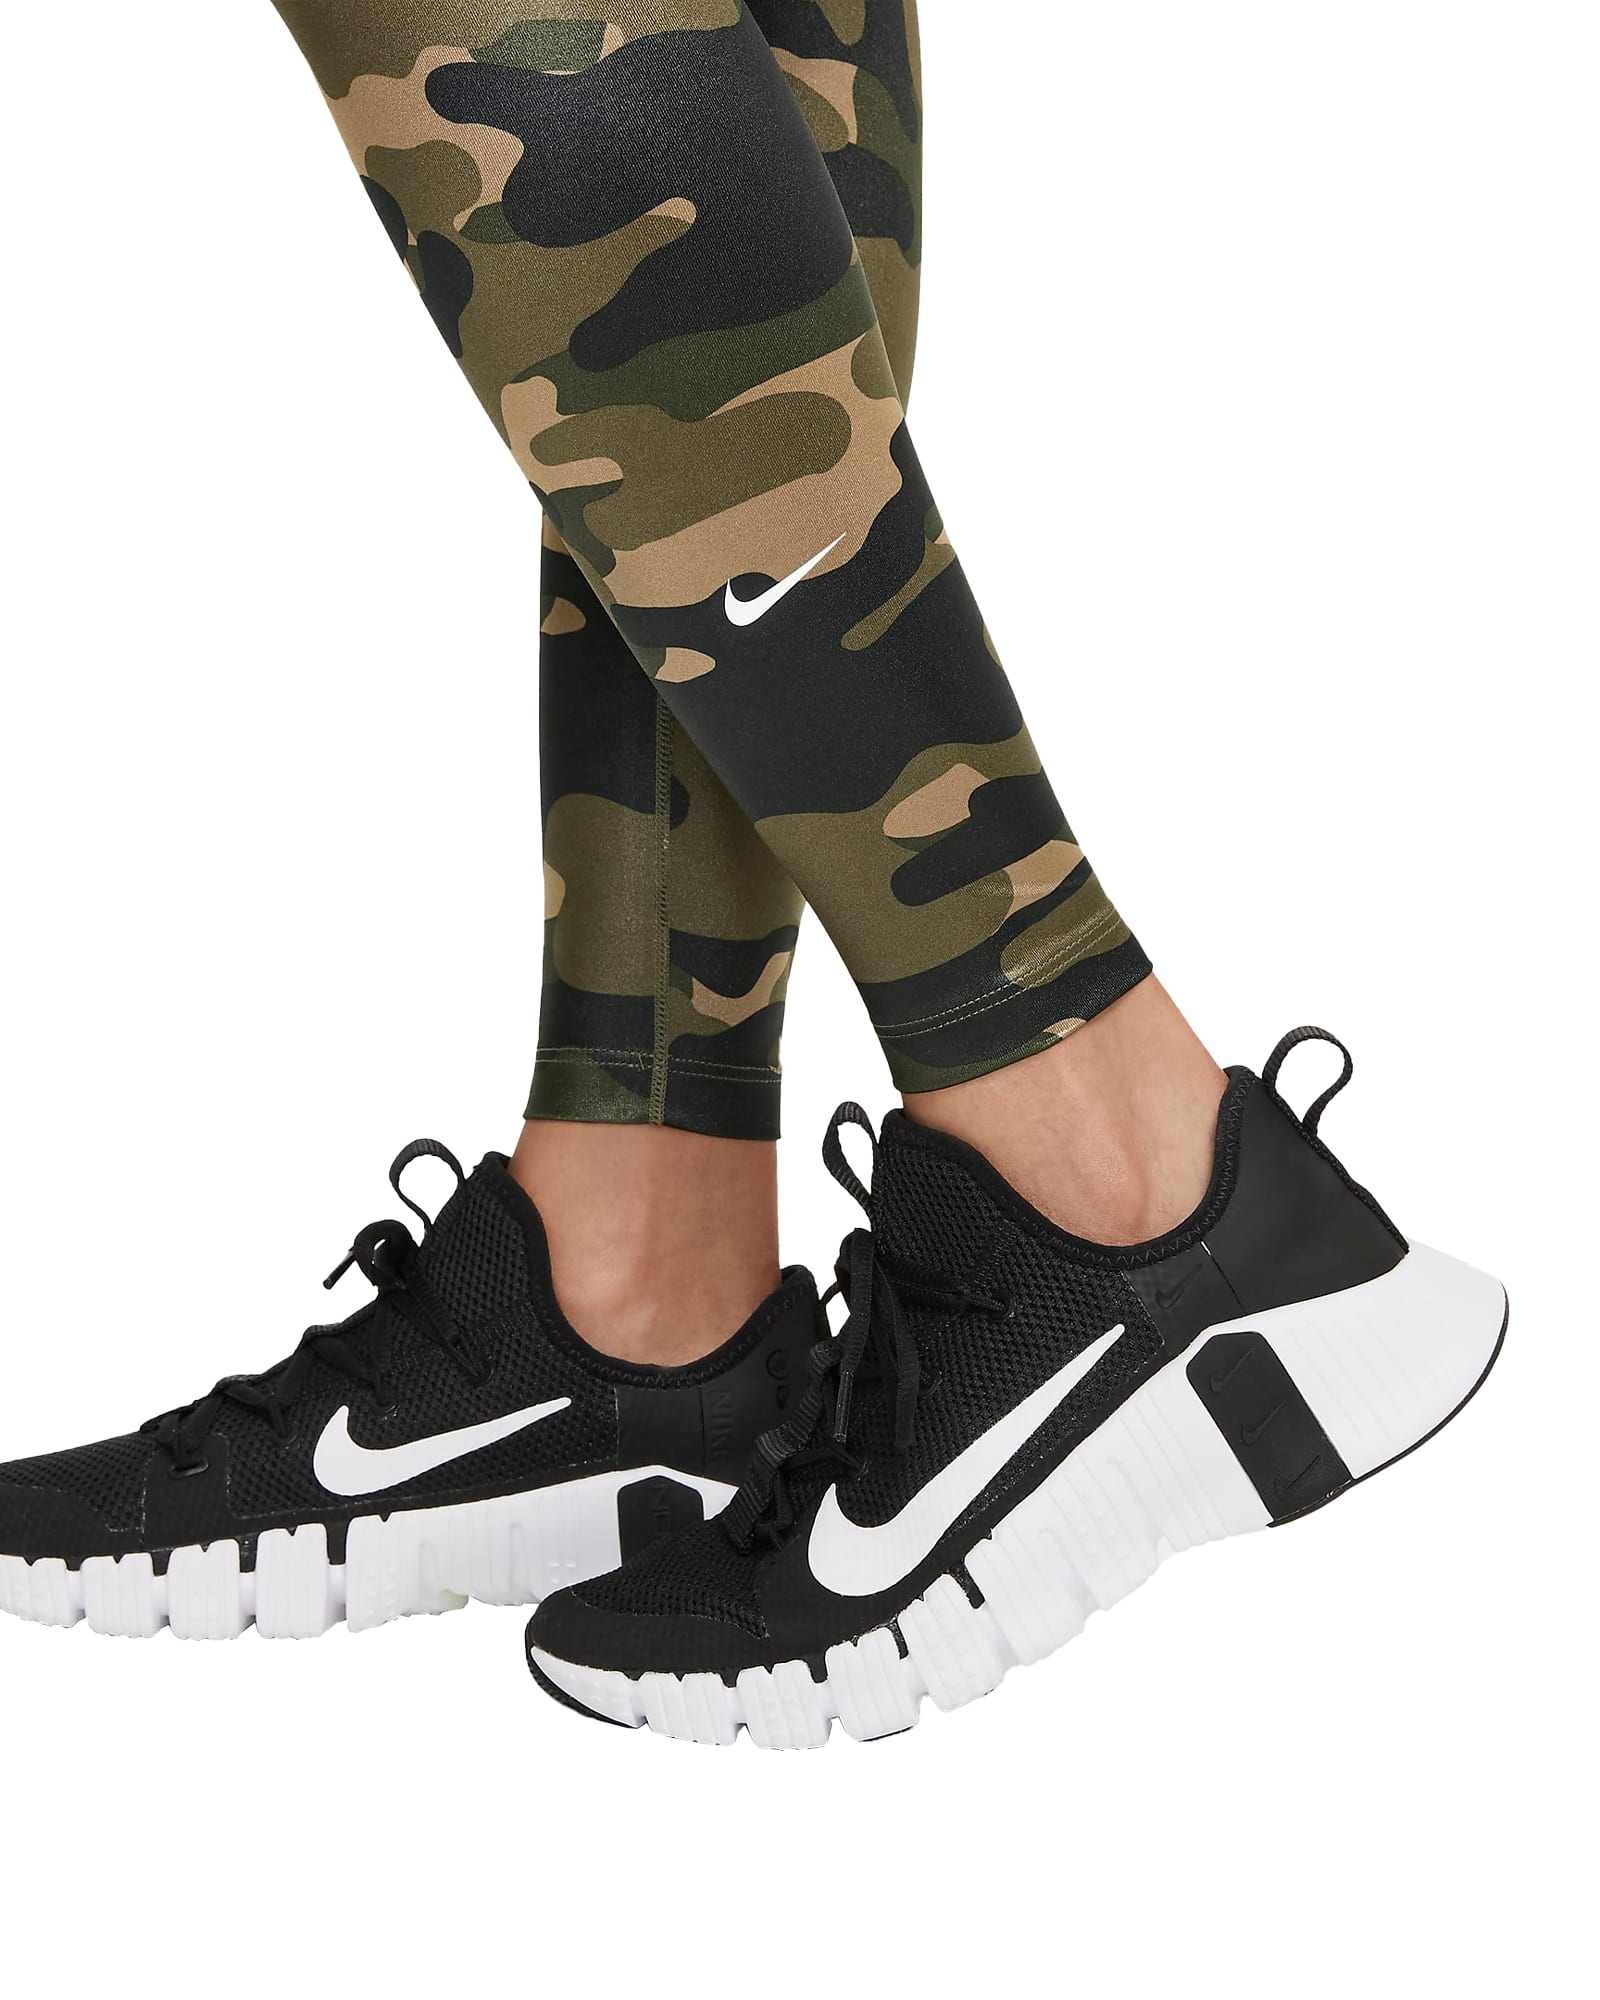 Nike Running Dri-FIT Fast mid rise camo leggings in black - ShopStyle  Activewear Trousers